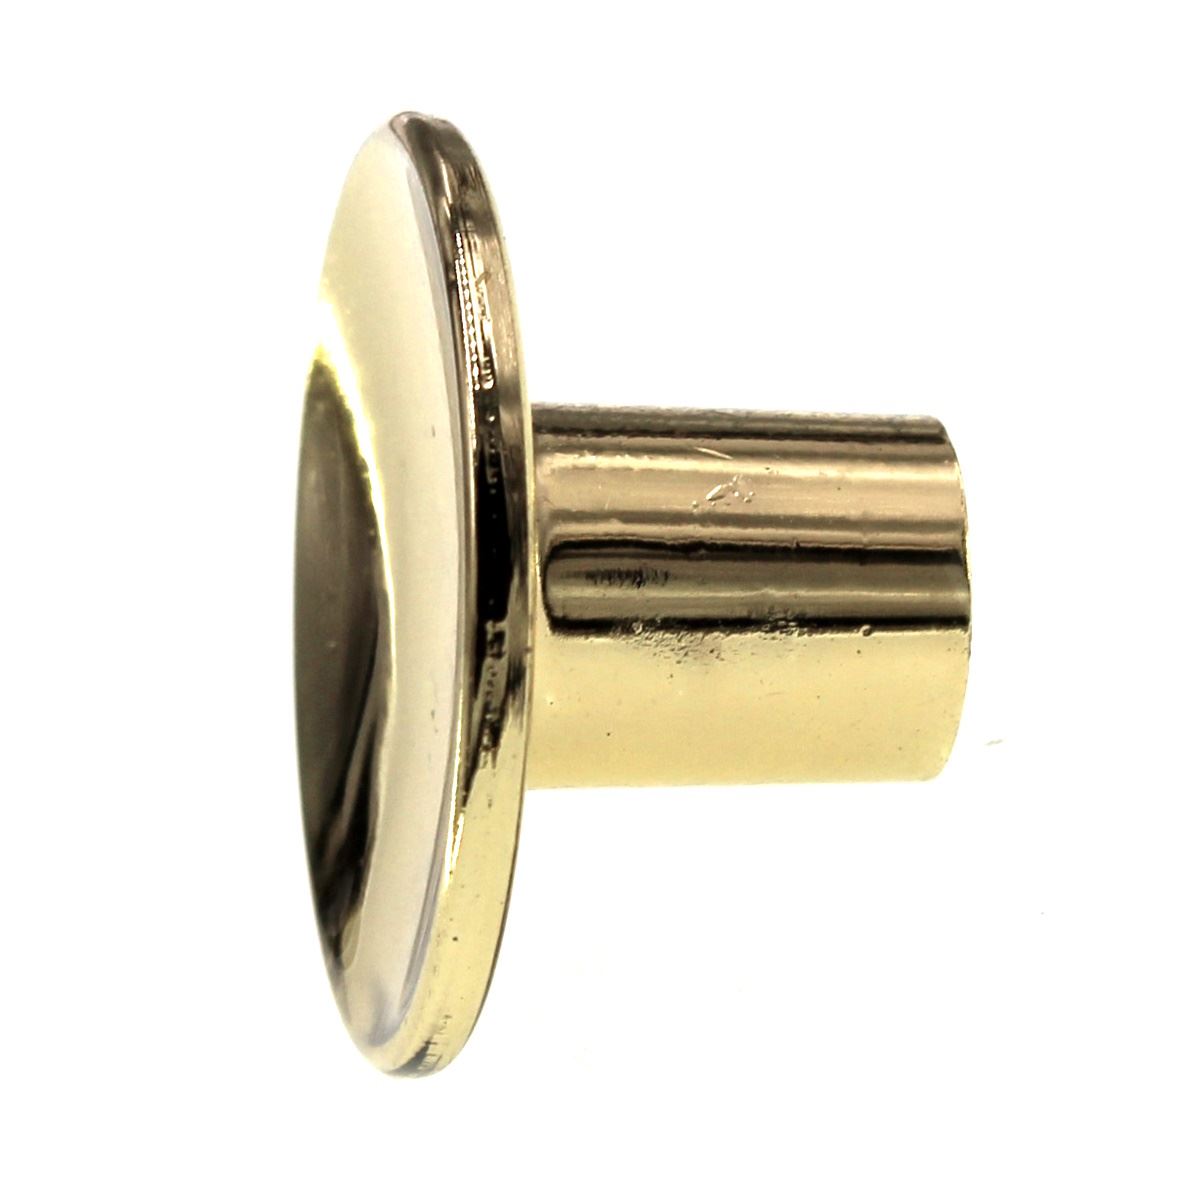 Sold Brass Mid Century Modern Concave Knob in Brushed Brass Gold